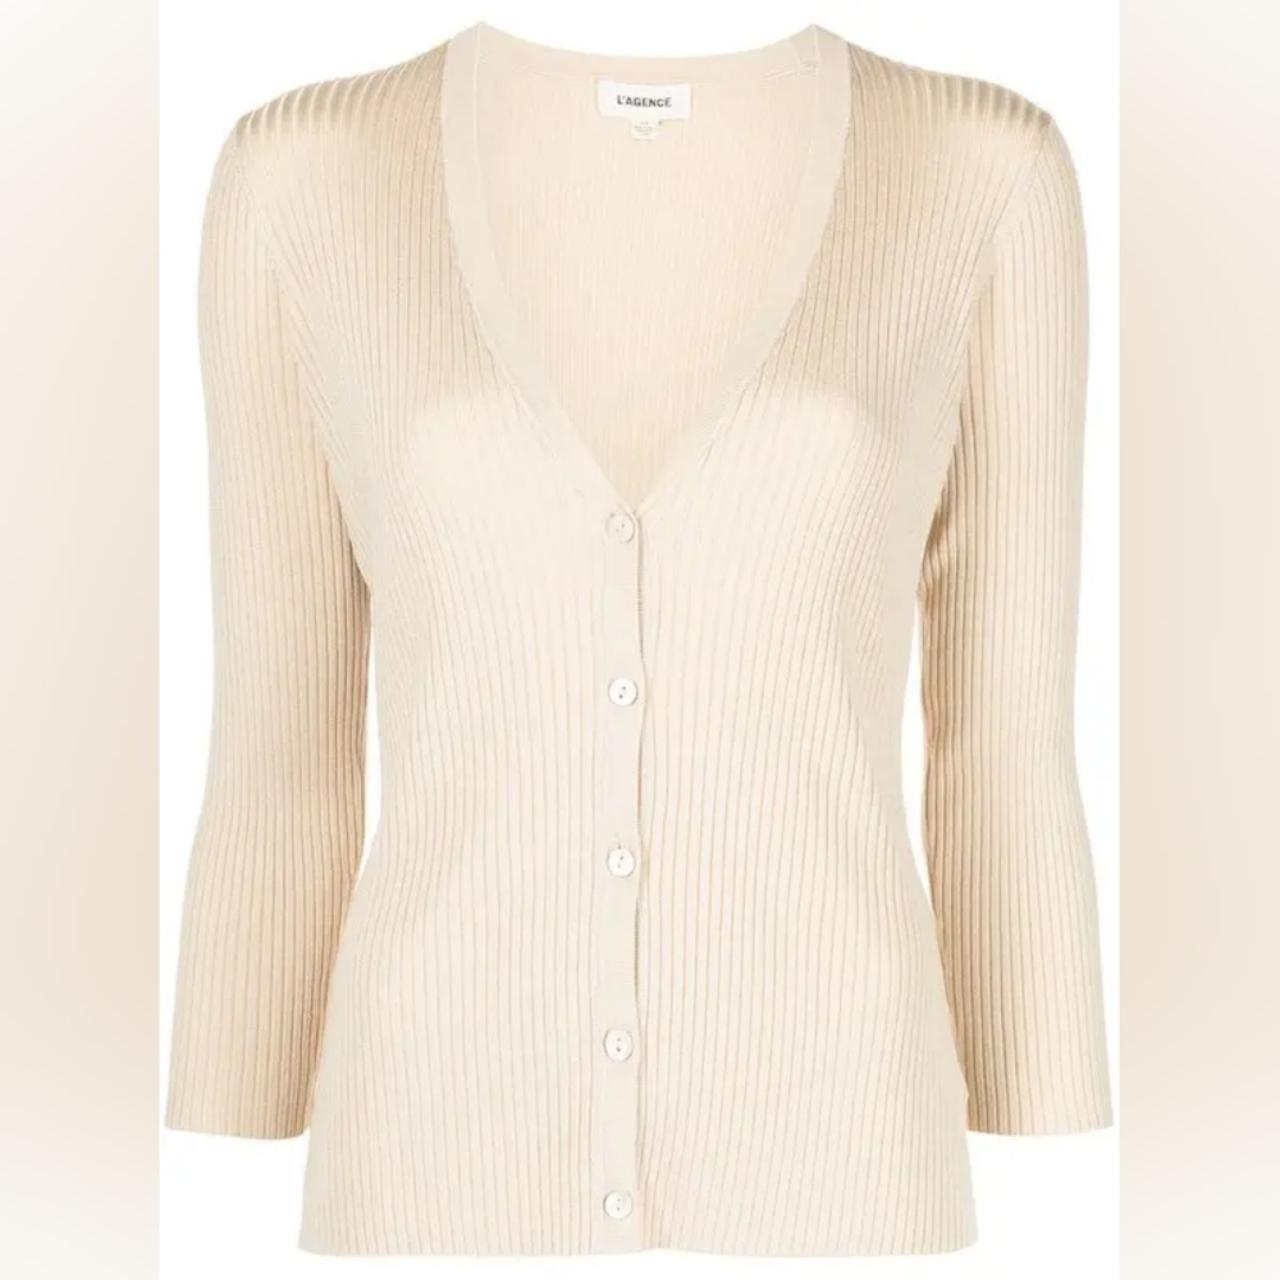 L’AGENCE Isabella Button Up Cardigan in Cream / Gold... - Depop